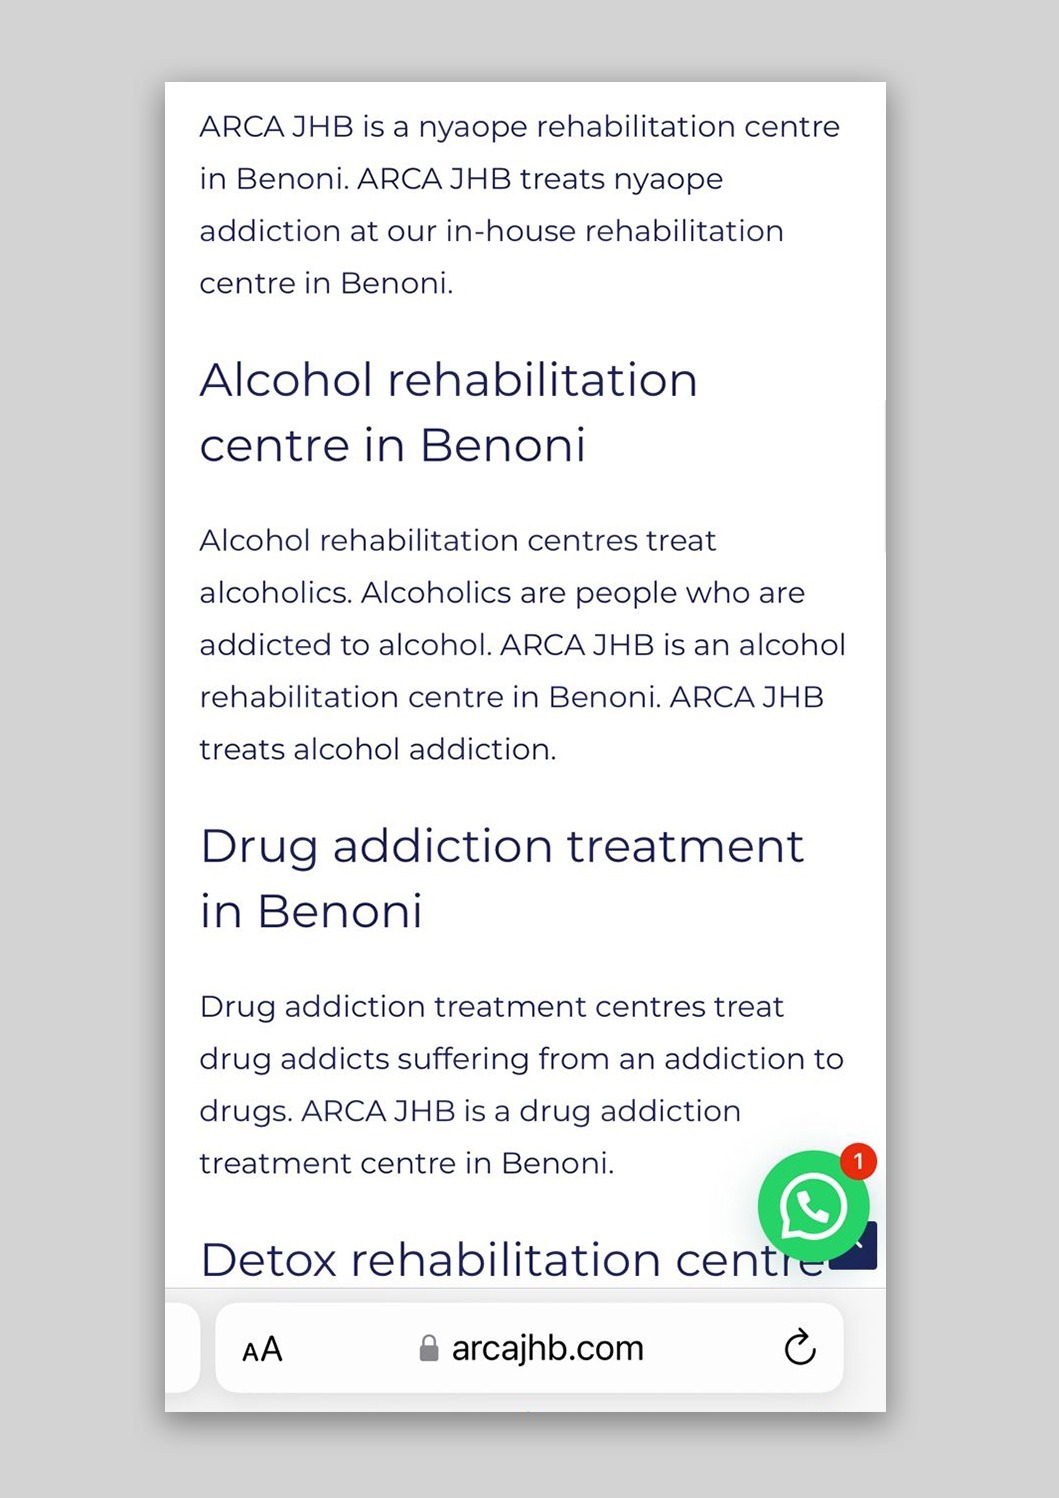 ARCA Johannesburg's detailed service offerings including treatment for nyaope addiction.